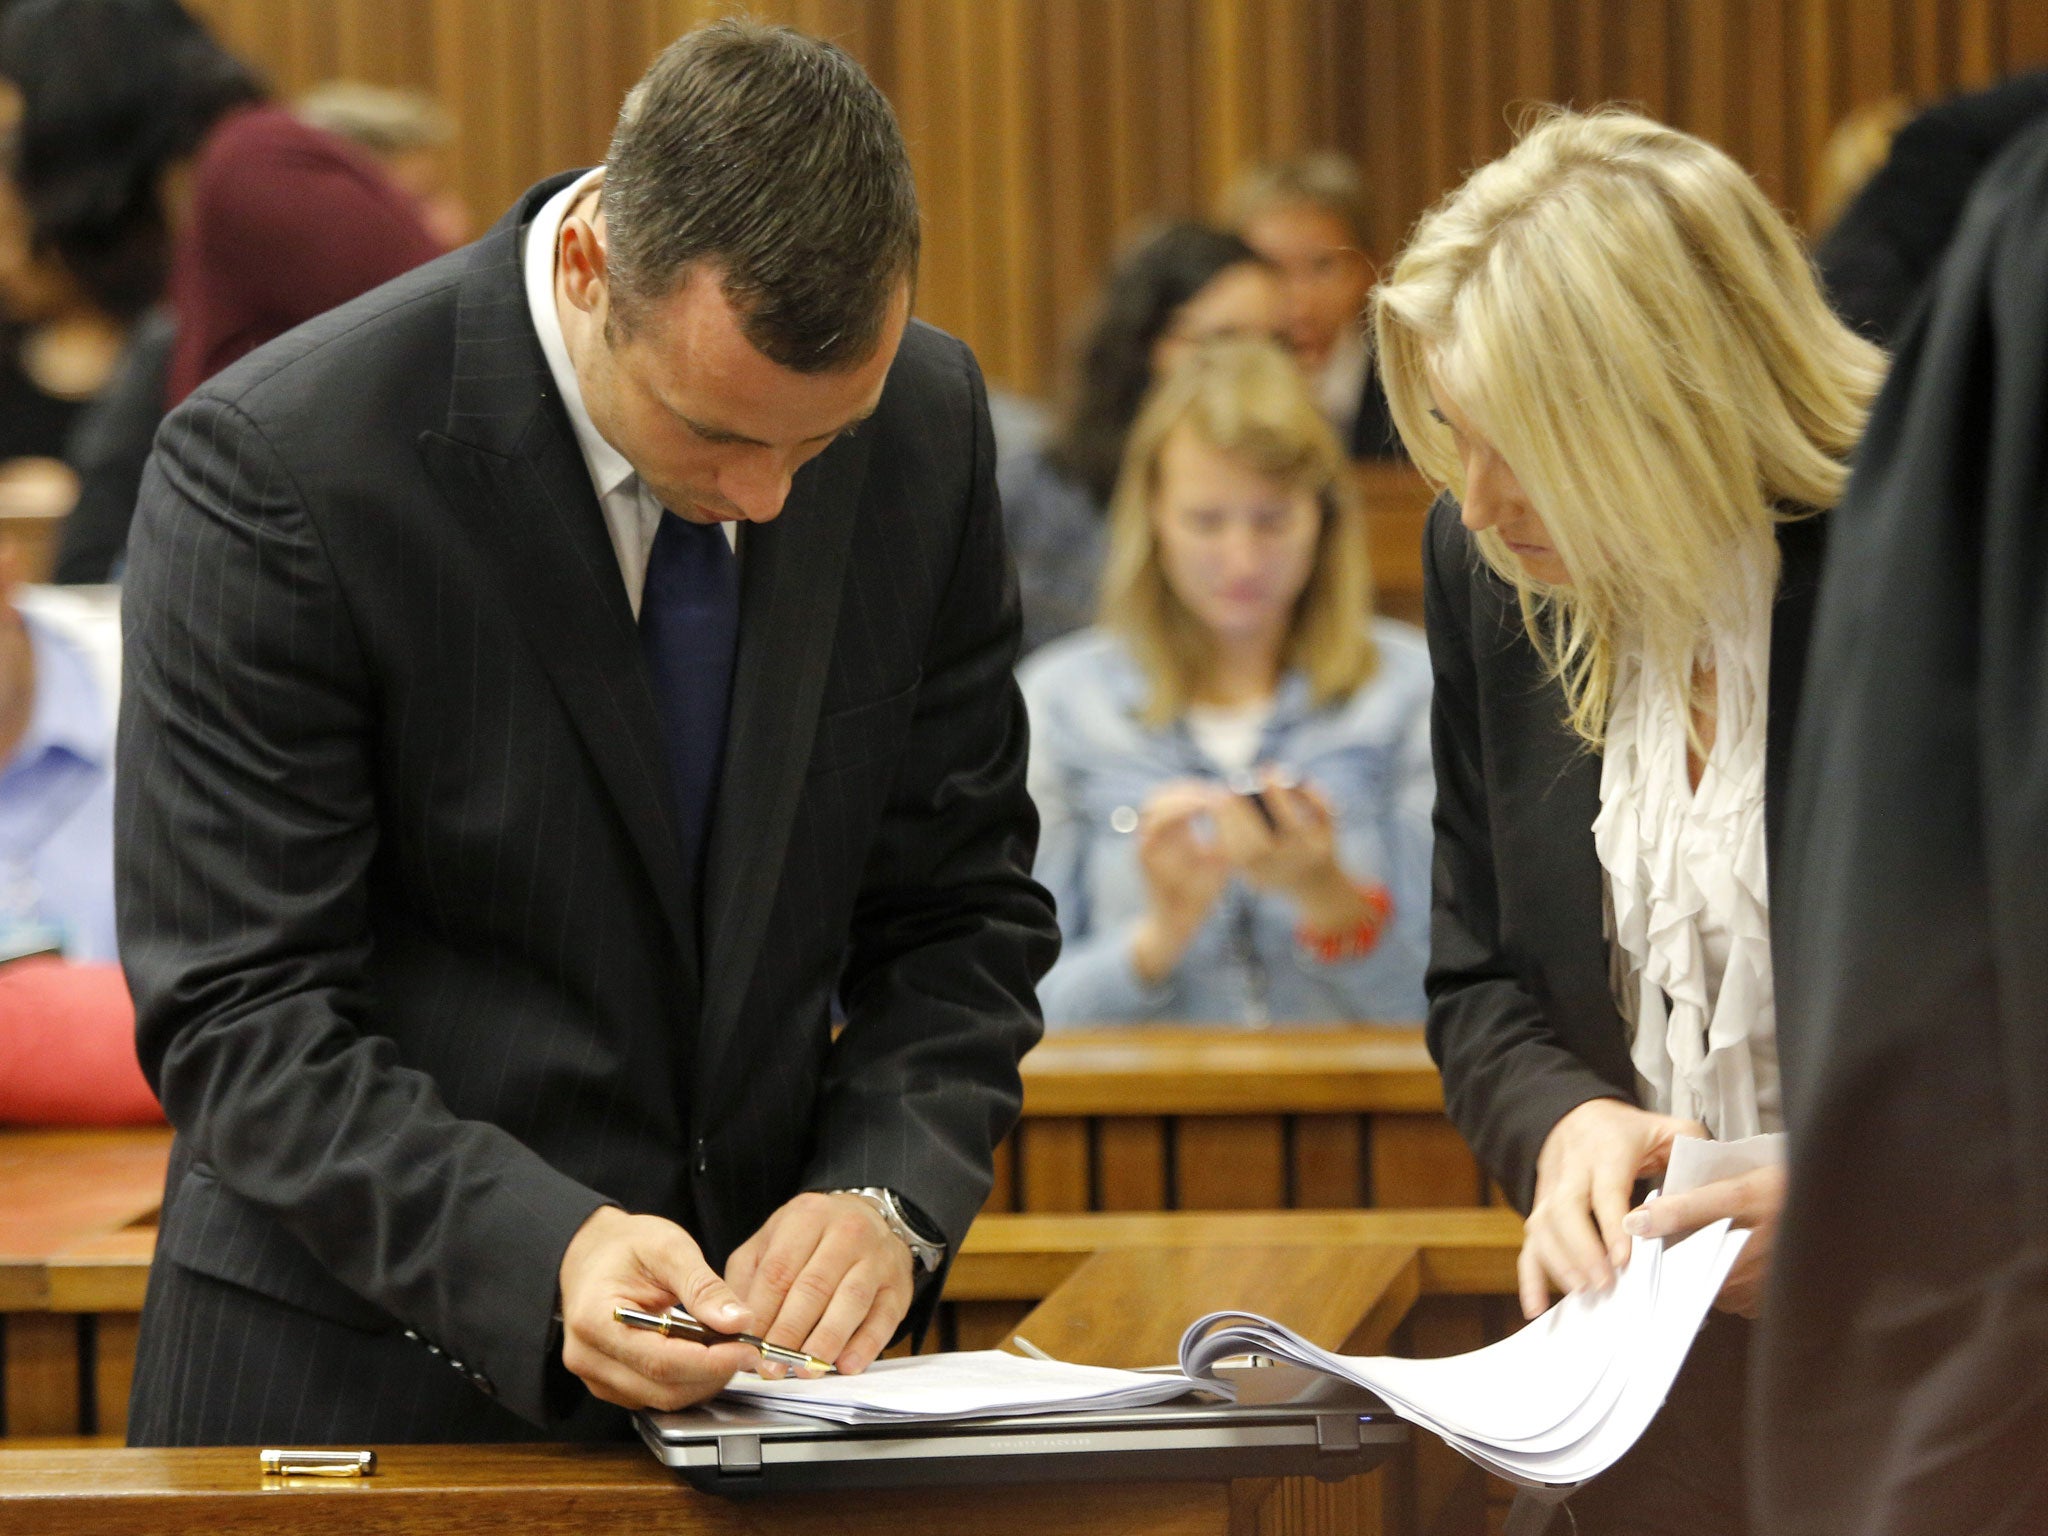 Oscar Pistorius looks at his defense team paperwork during a break on the second day of his trial at the North Gauteng High Court in Pretoria 